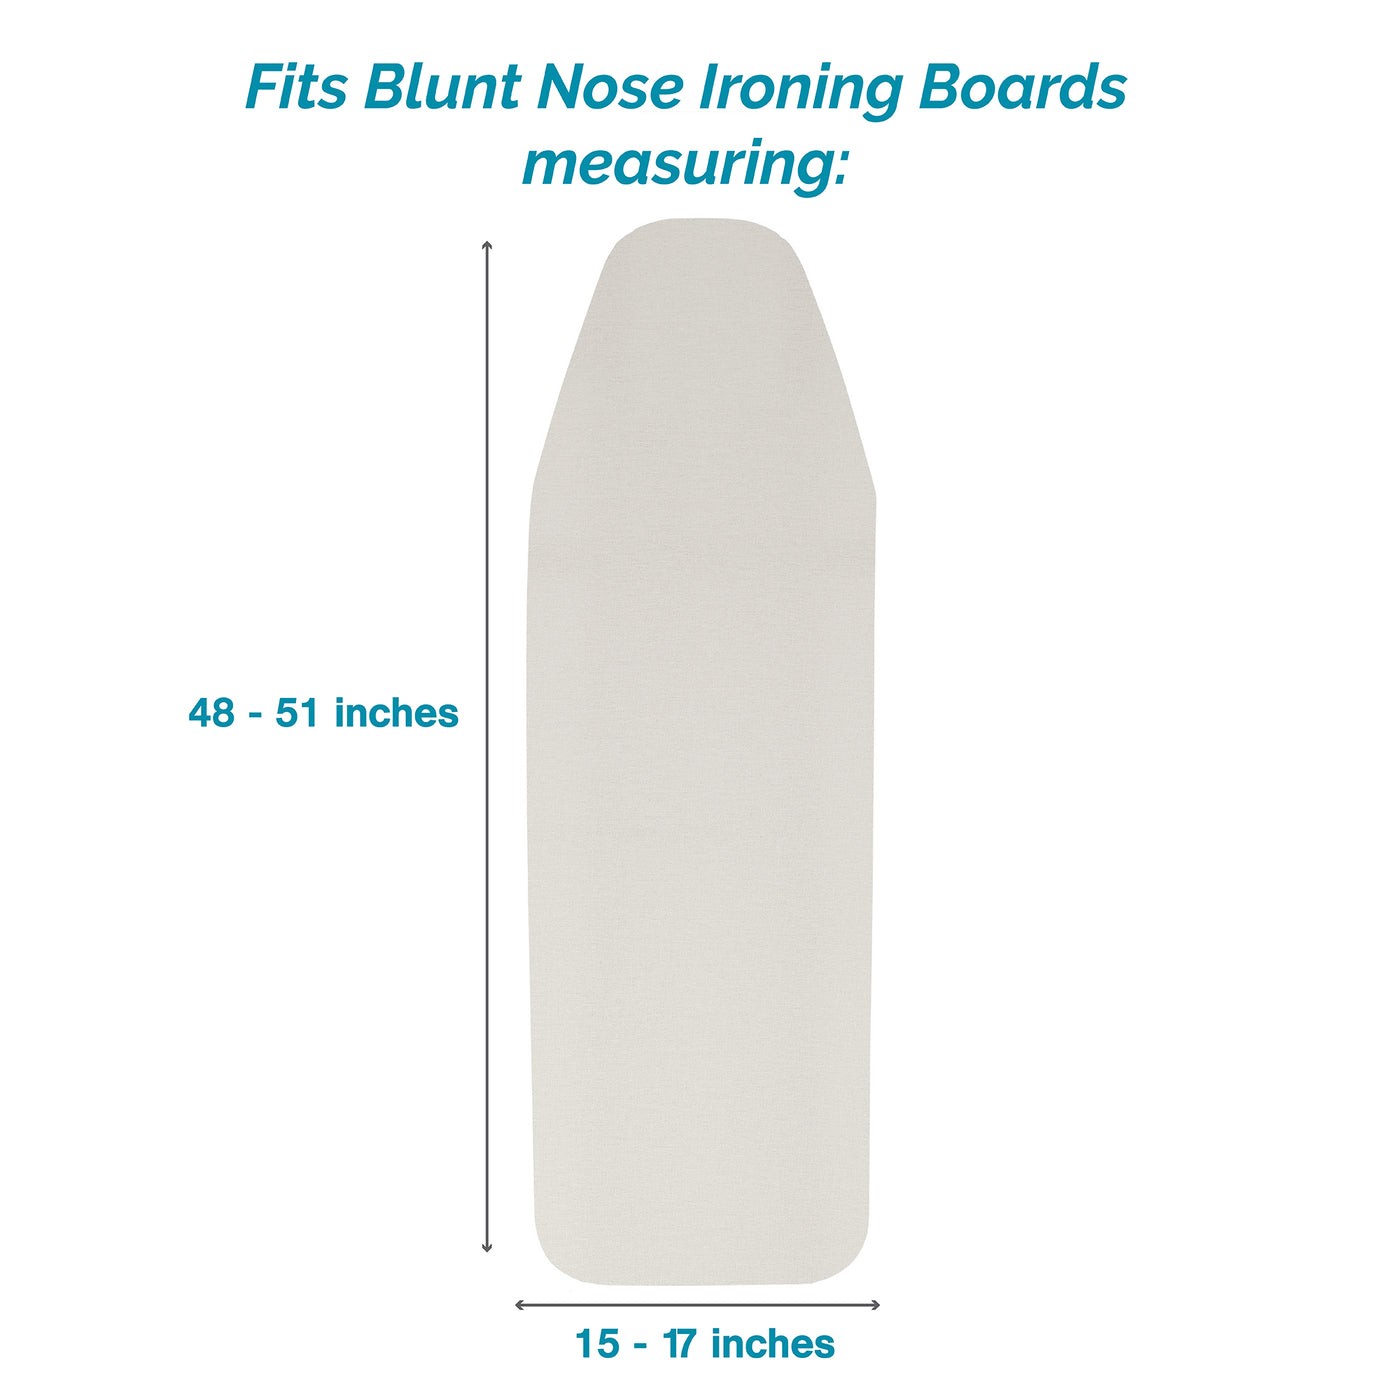 8mm Pad & Cover (48-51 x 15-17 inches) Blunt nose